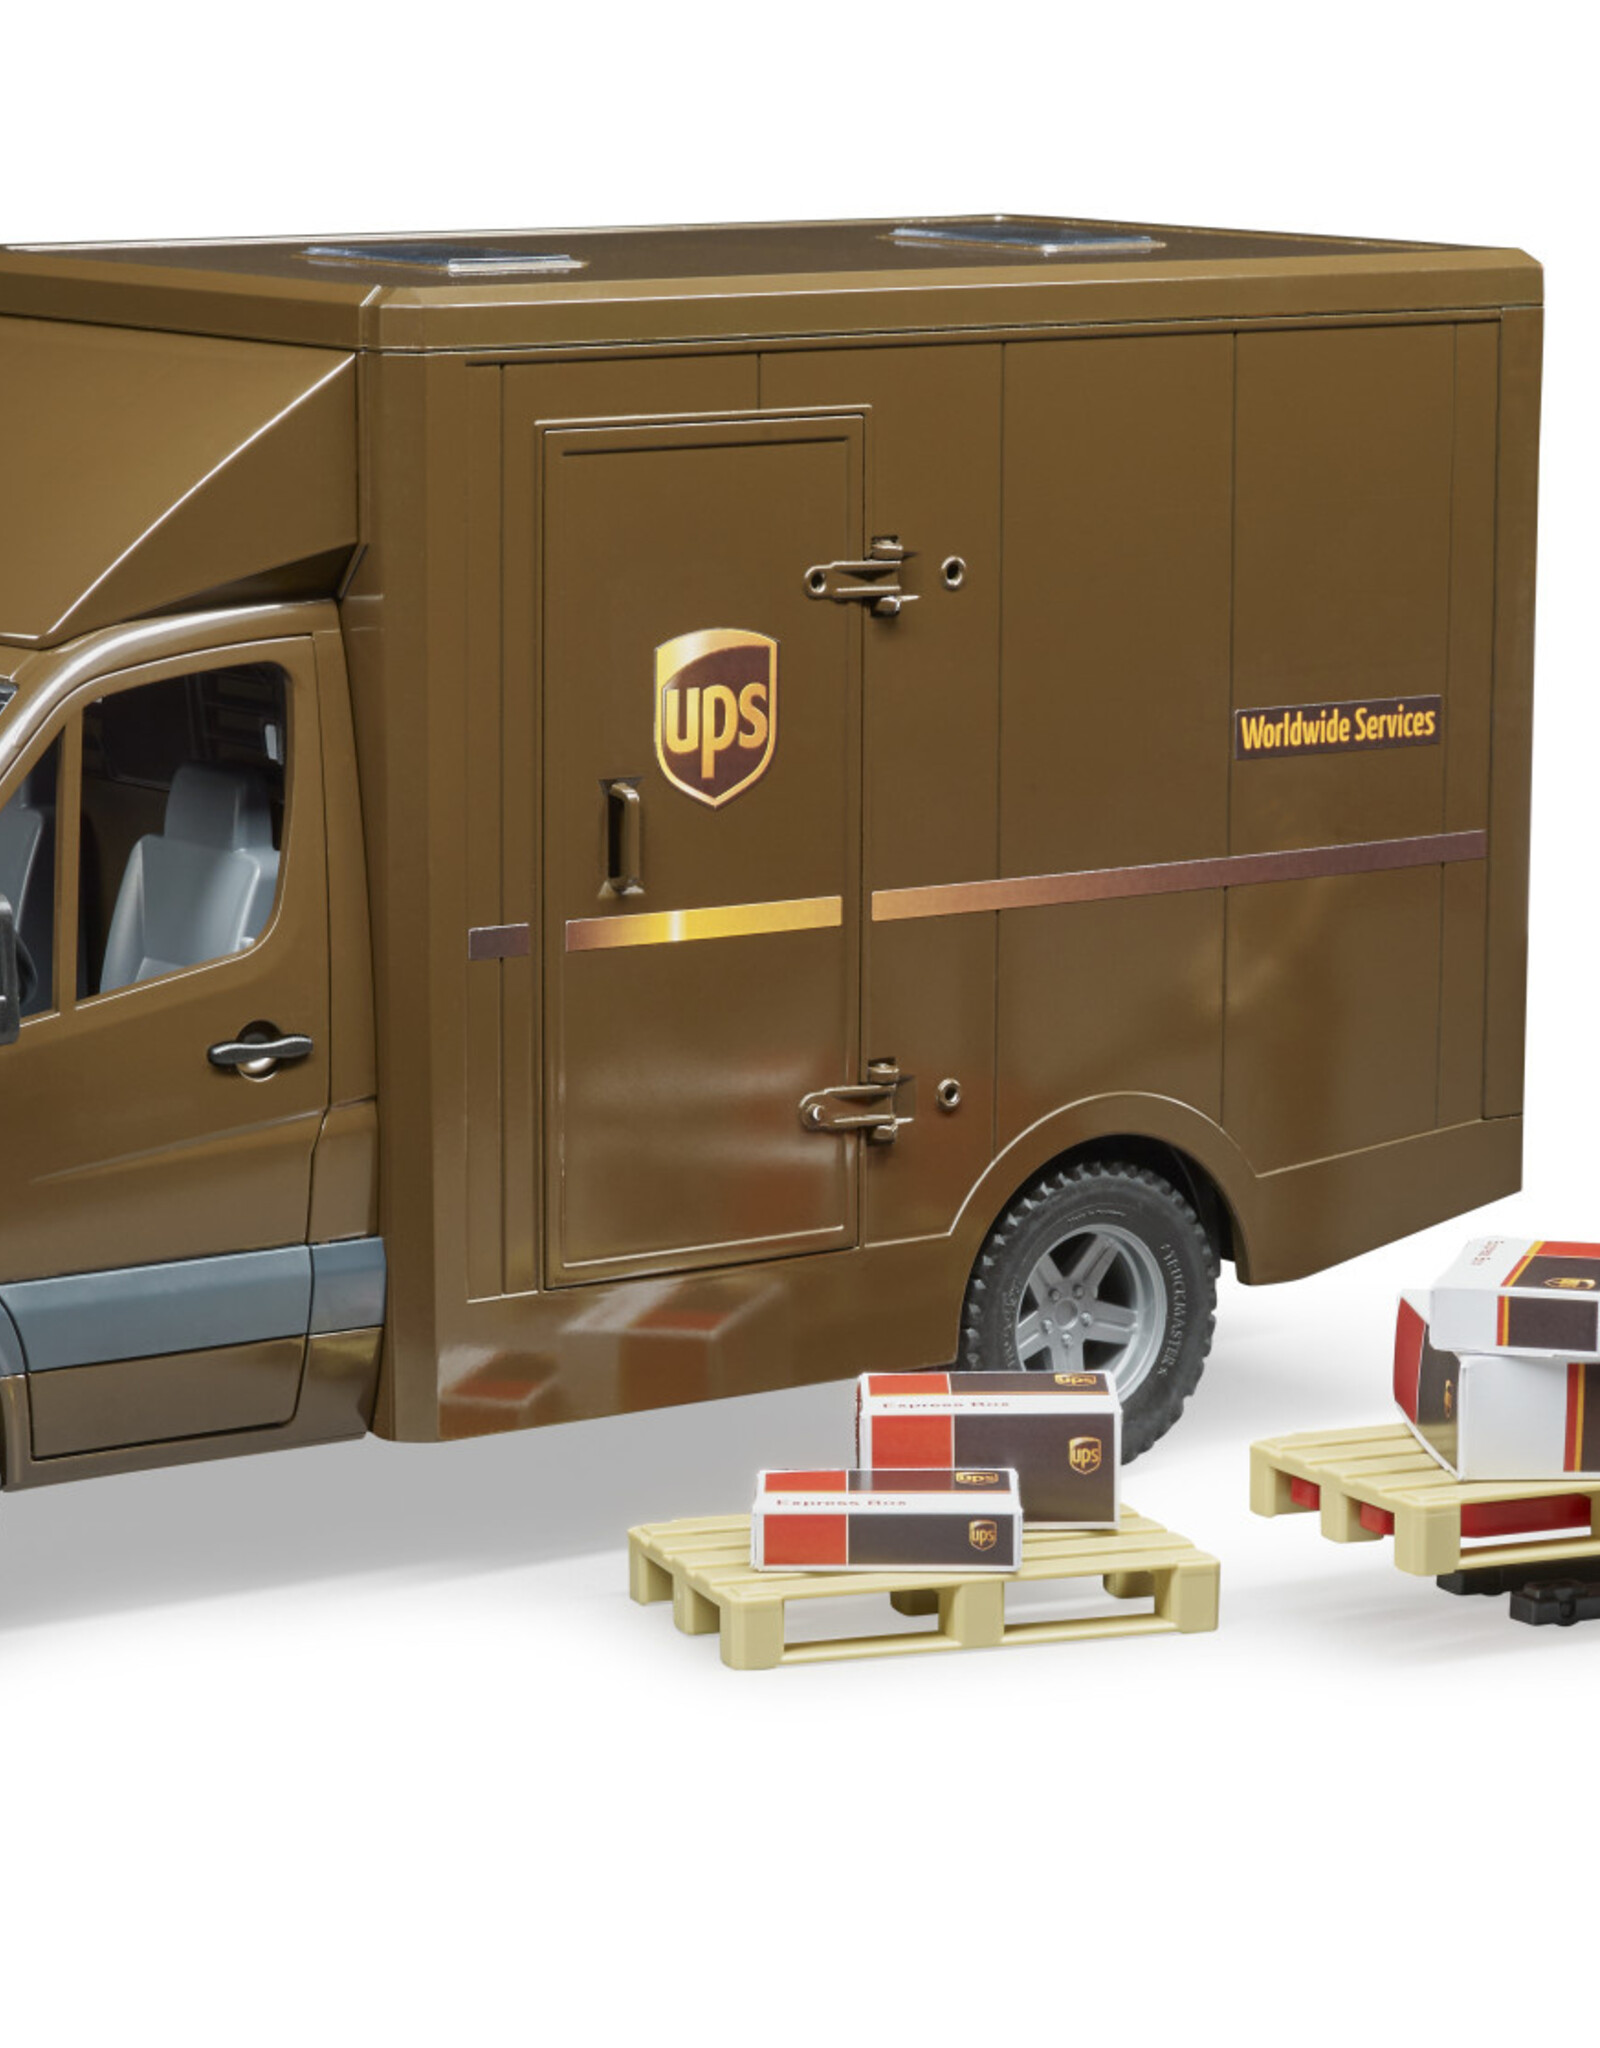 BRUDER TOYS AMERICA INC MB Sprinter UPS Truck with Manually Operated Pallet Jack